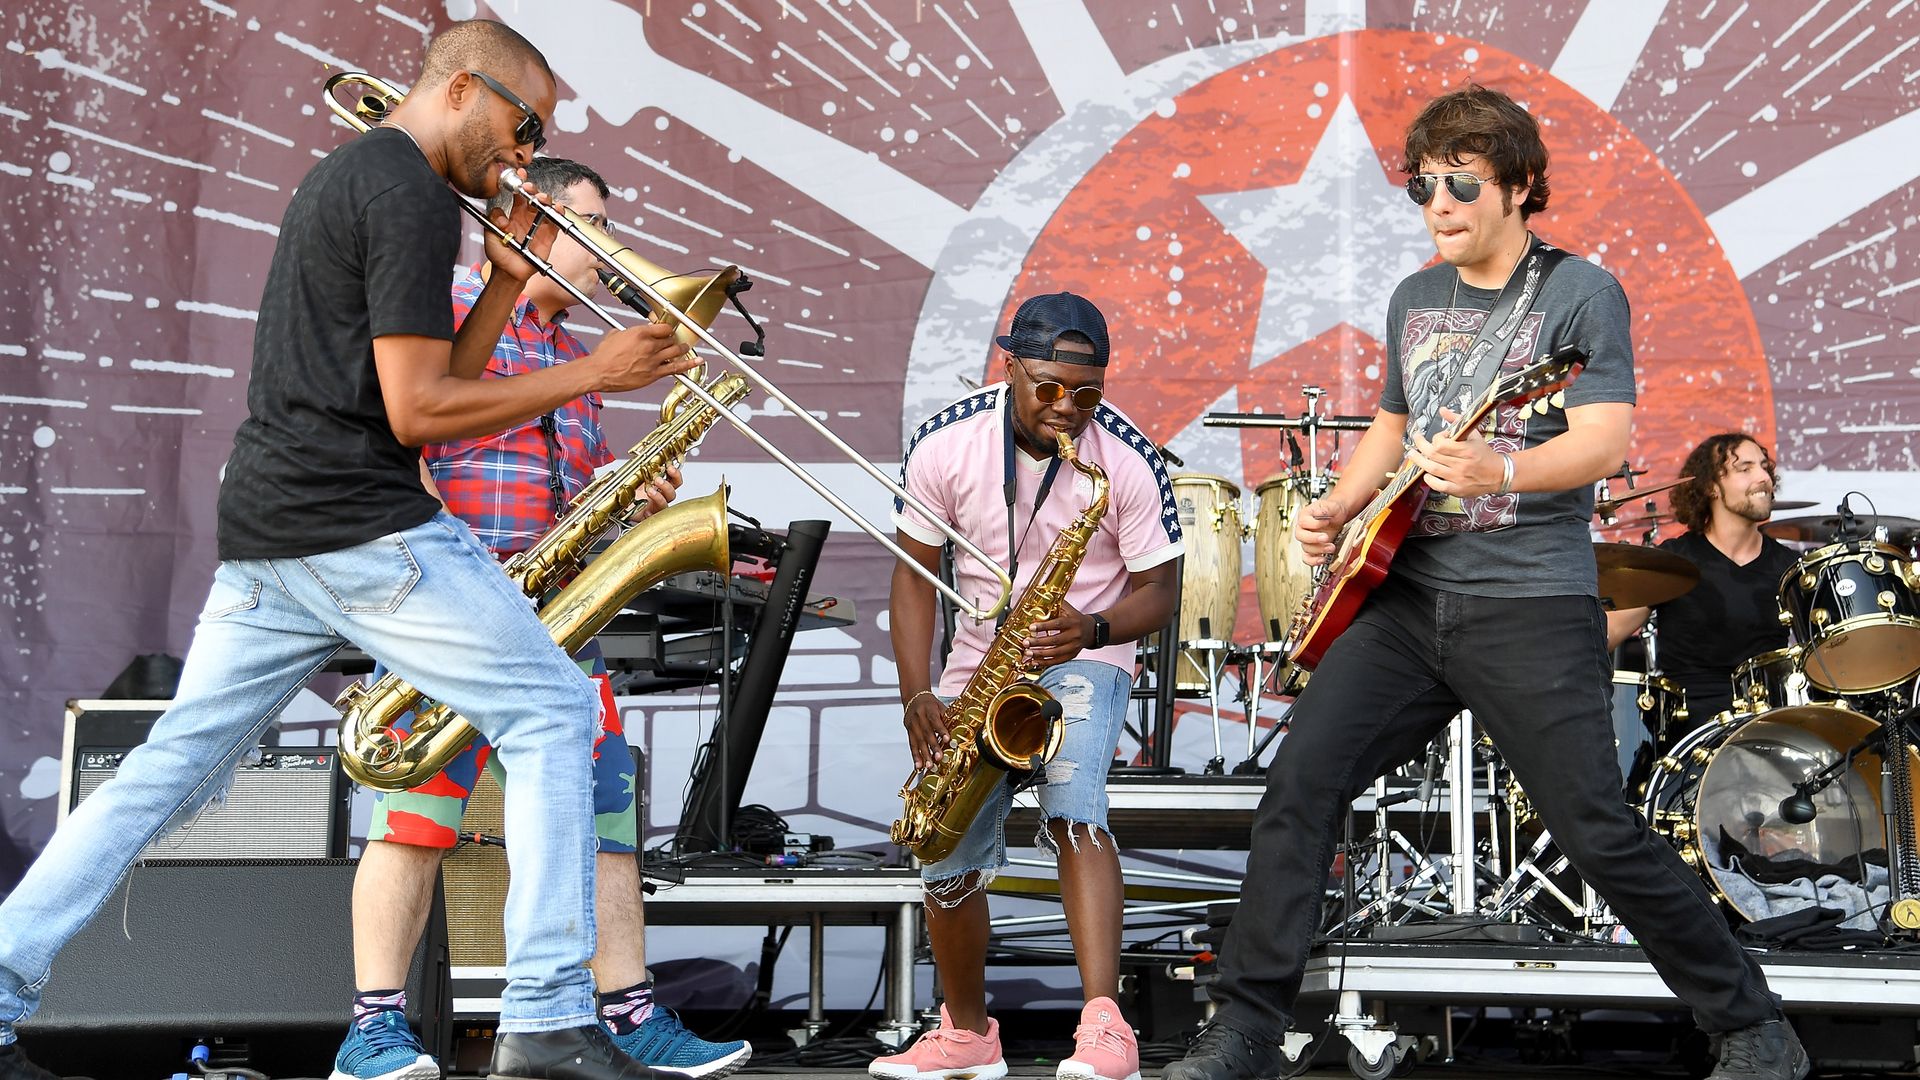 Trombone Shorty, Dan Oestricher, BK Jackson, and Pete Murano perform during the Pilgrimage Music & Cultural Festival 2017 on September 23, 2017 in Franklin, Tennessee. 